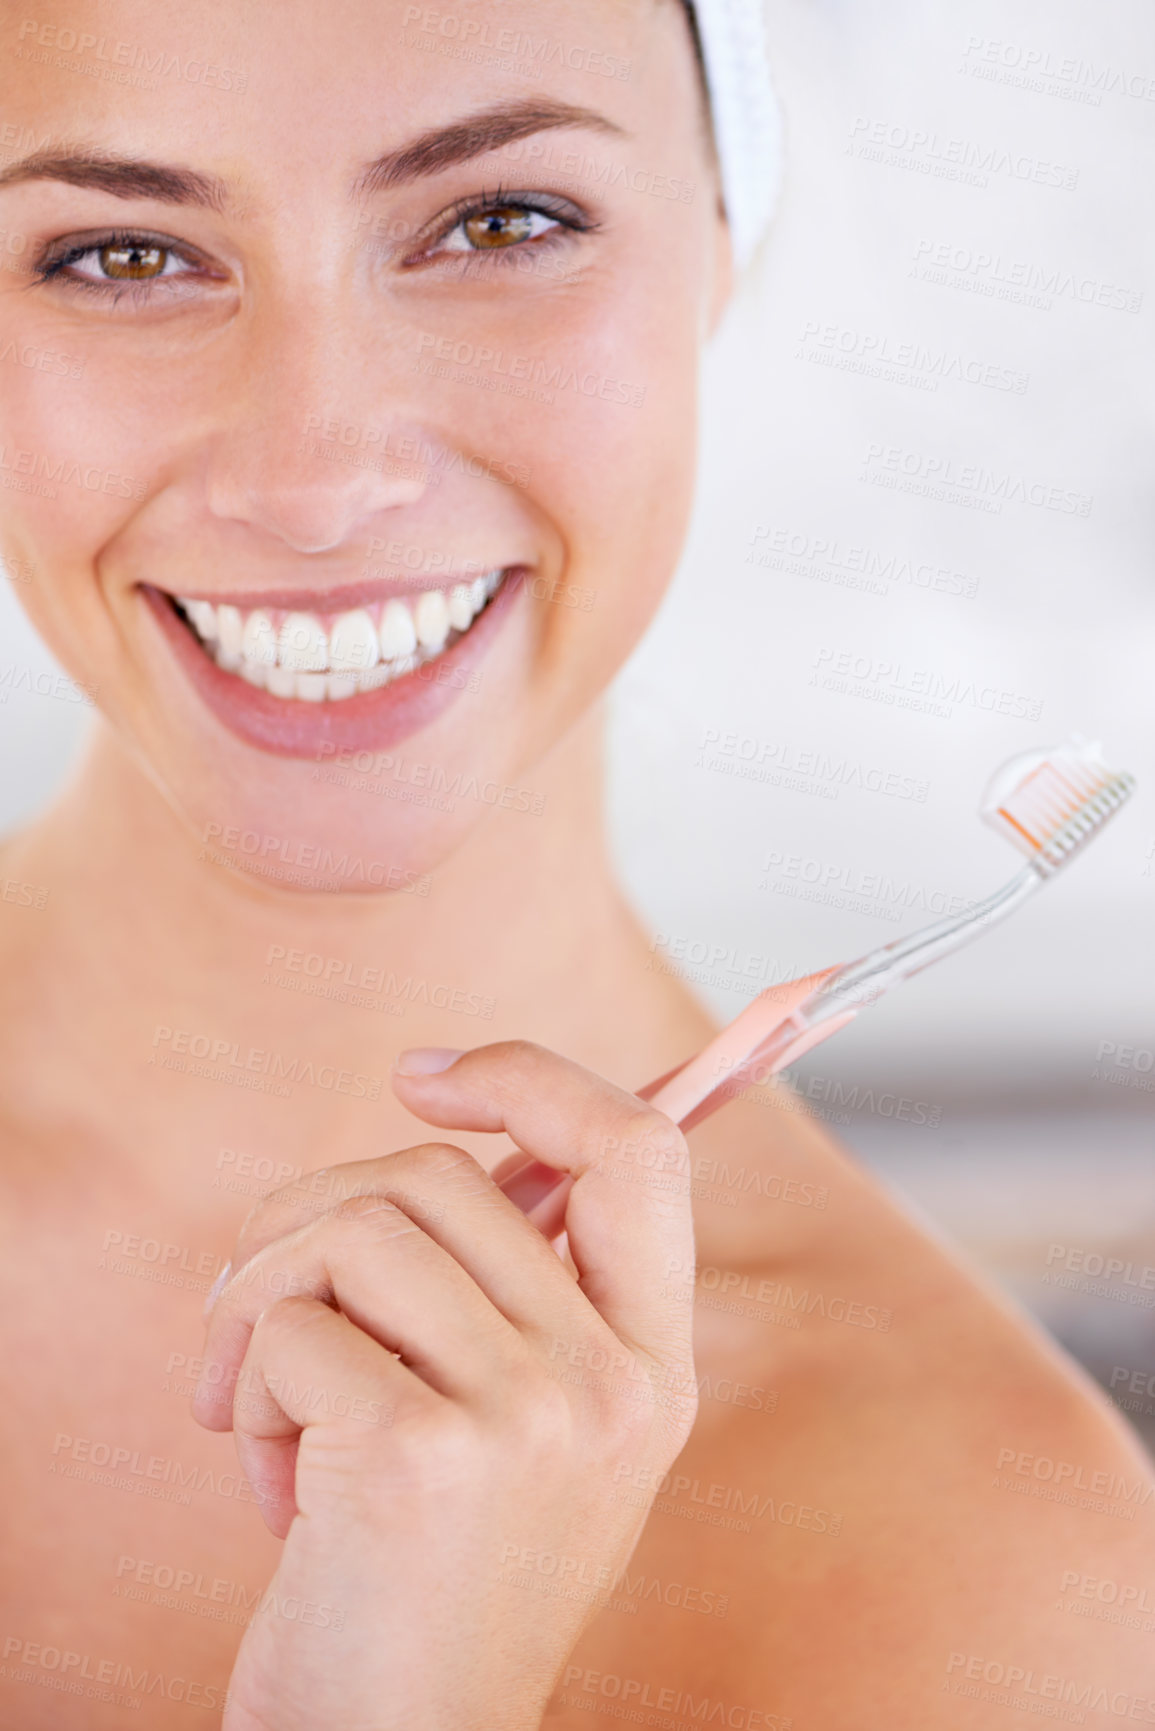 Buy stock photo Toothbrush, smile and portrait of woman brushing teeth for health, wellness and morning oral routine. Self care, dental and young female person with mouth for clean, hygiene or dentistry treatment.